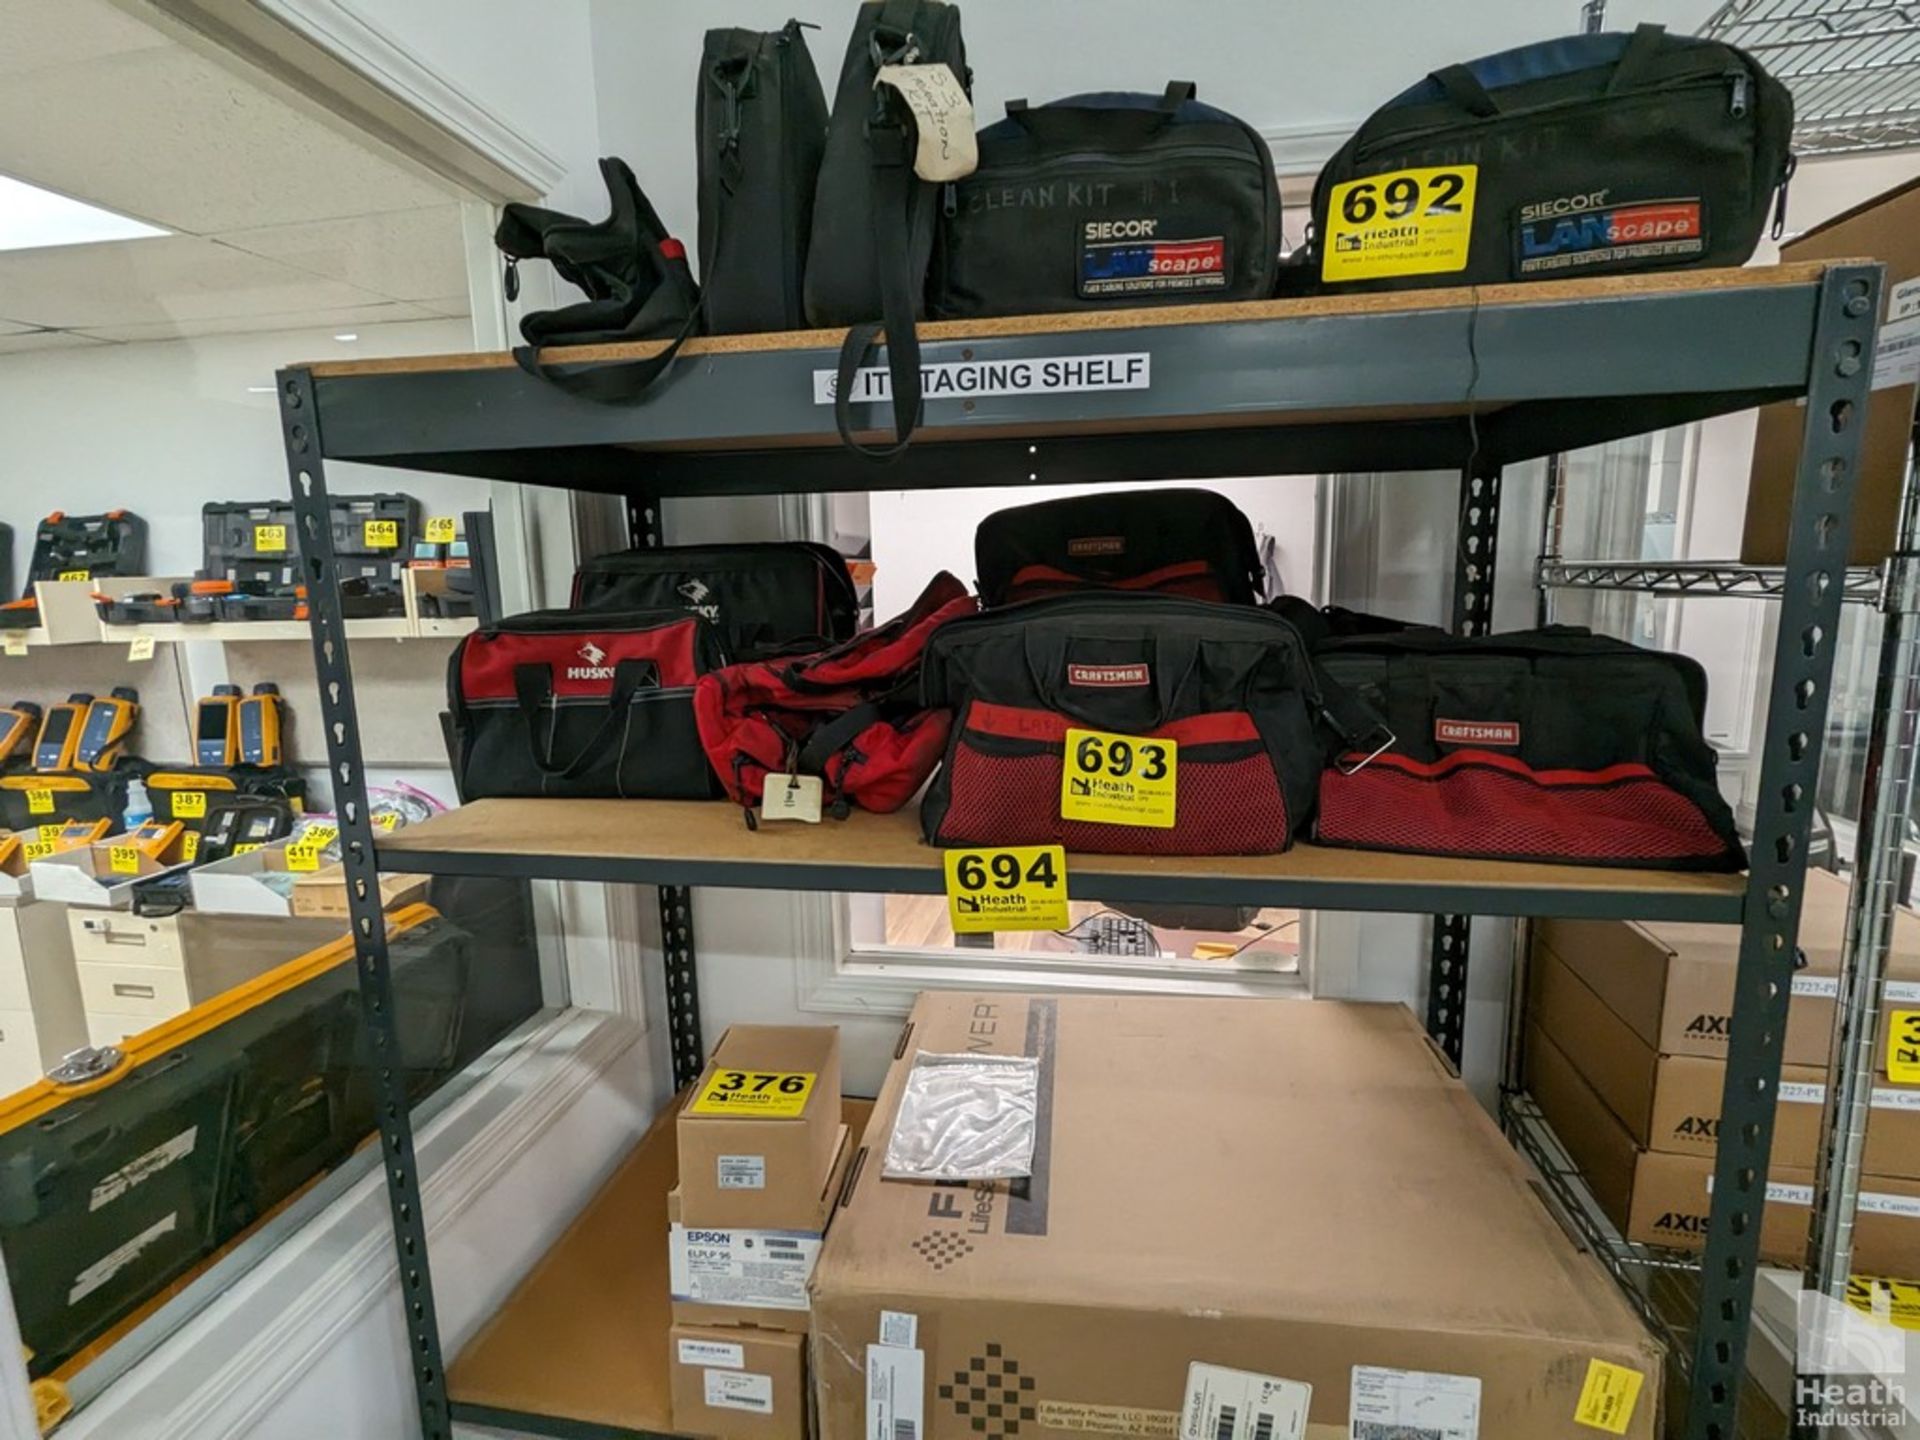 ASSORTED CRAFTSMAN TOOL BAGS ON TOP SHELF